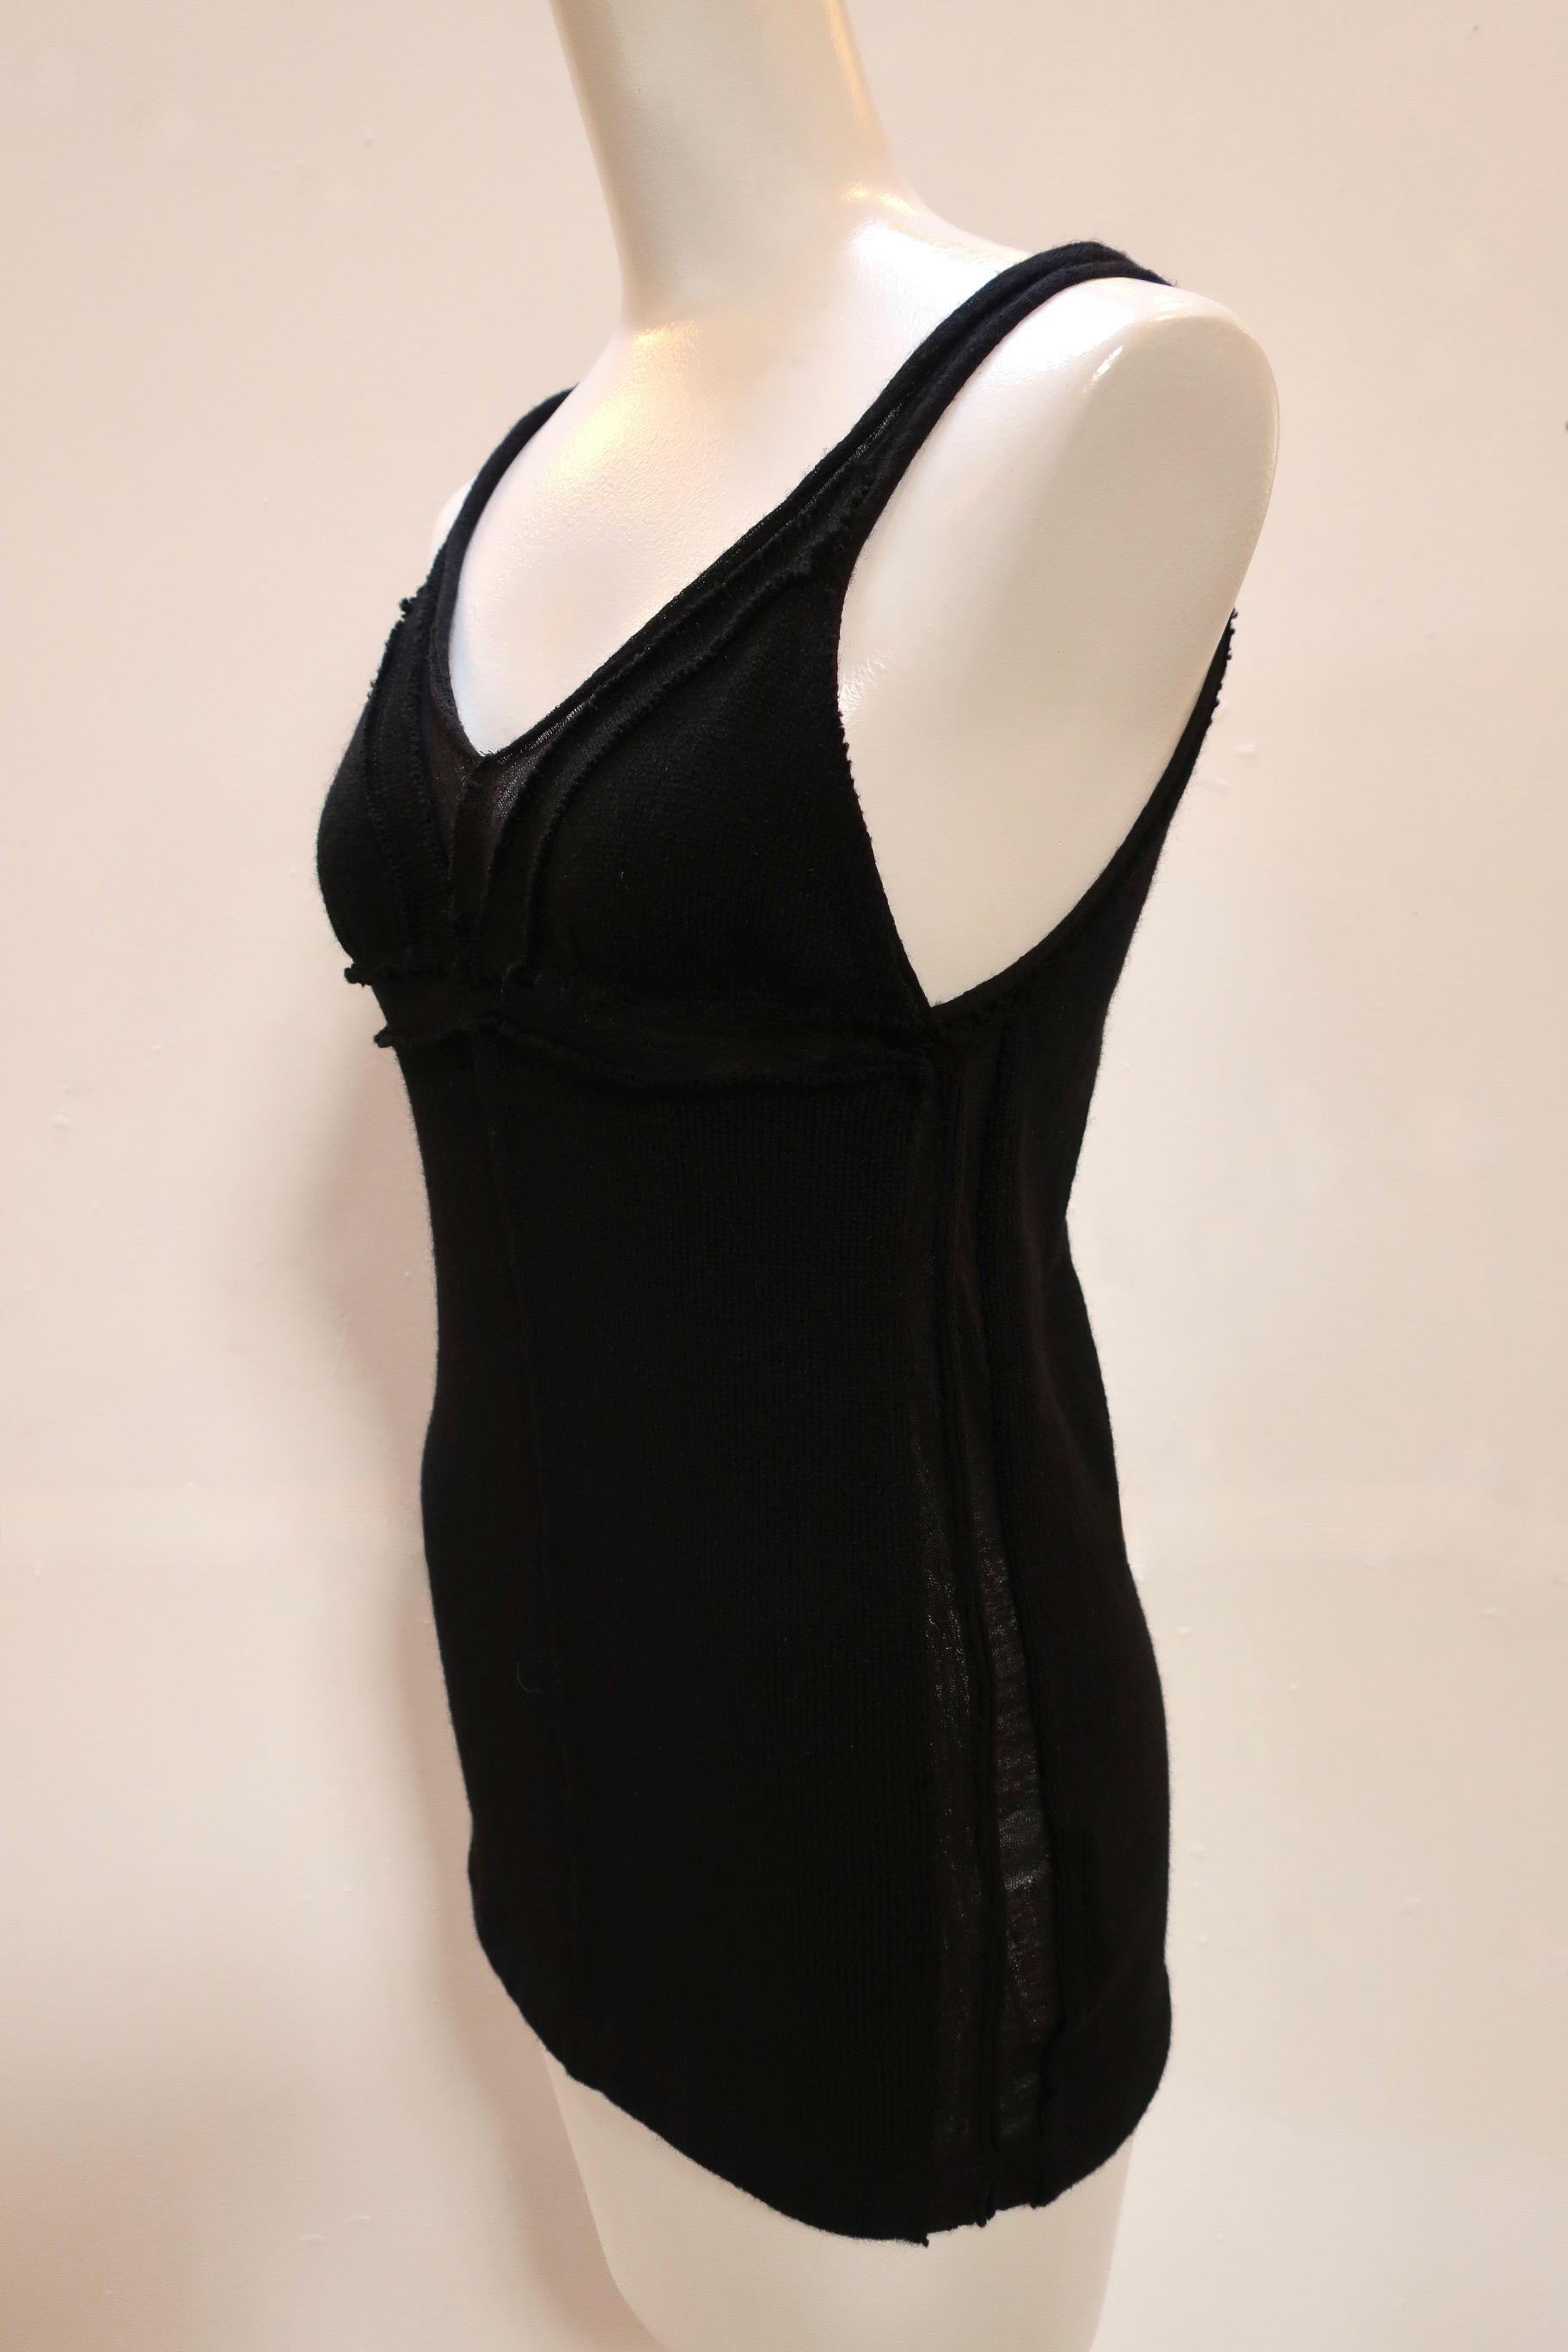 A beautiful knit tank top in black wool comes to you from TAO. This simple tank top is elevated with raw edges and semi-sheer seams. 